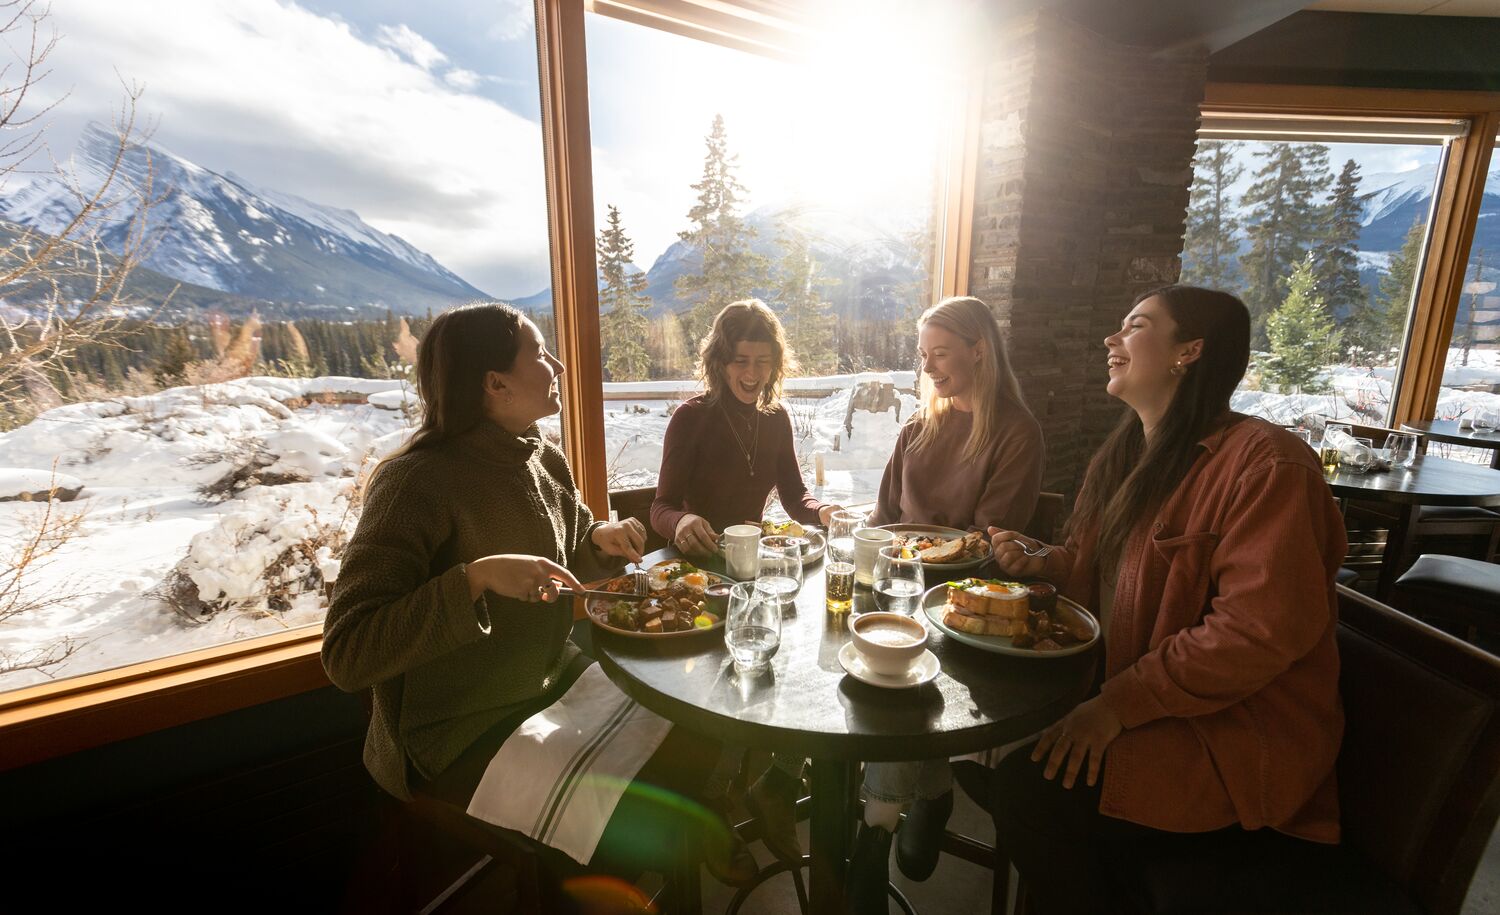 Four friends sit at a table eating brunch with mountains out the window behind them at the Juniper Bistro in Banff.